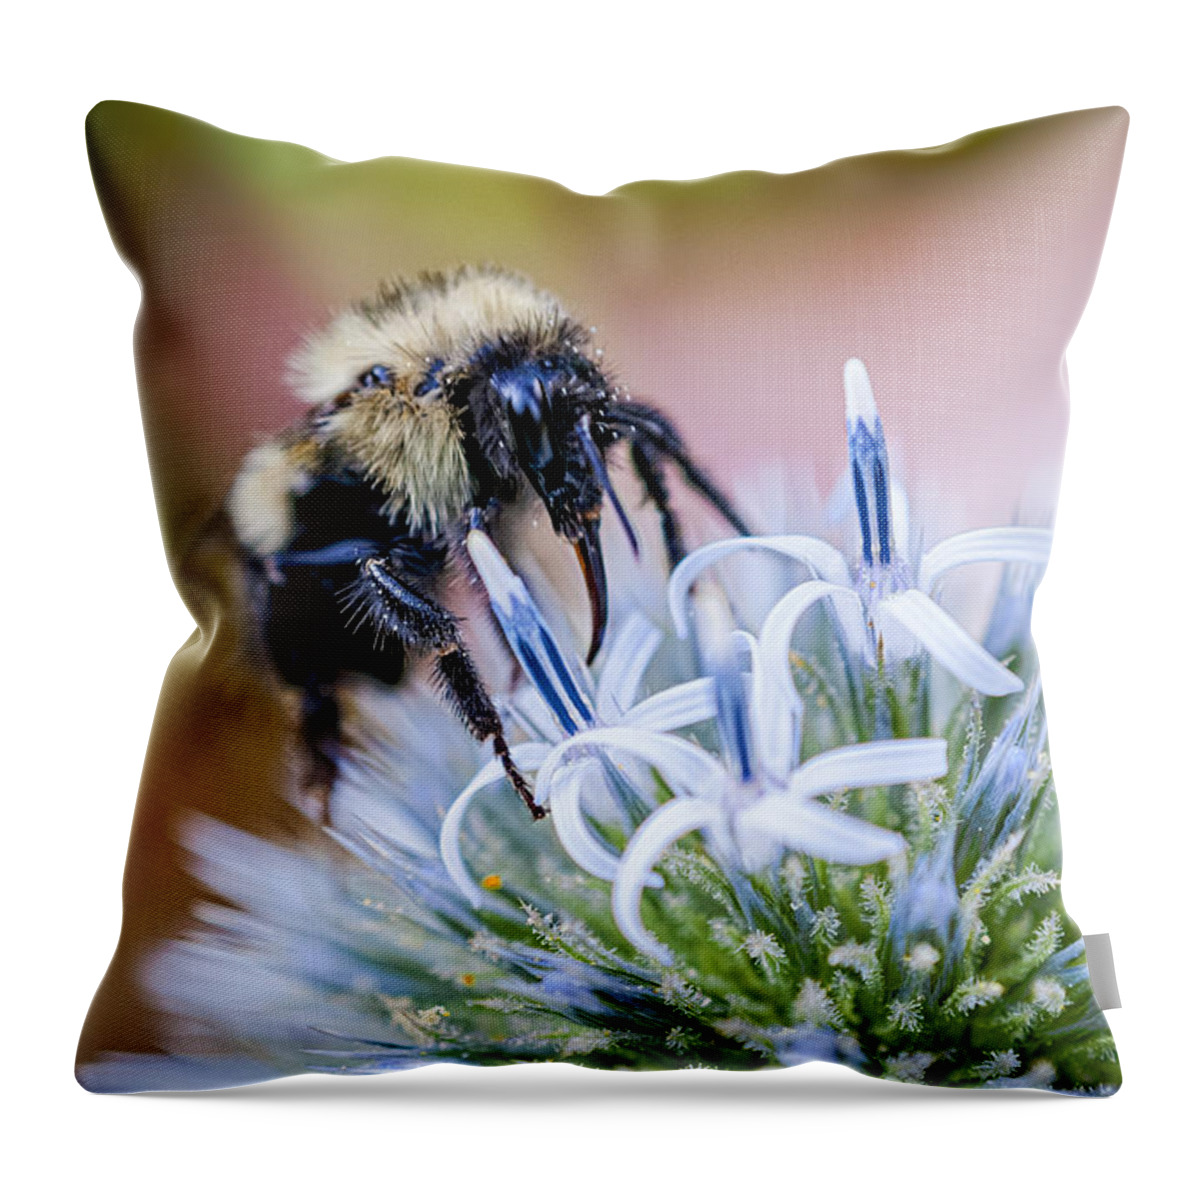 Thistle Throw Pillow featuring the photograph Bumblebee on Thistle Blossom by Marty Saccone